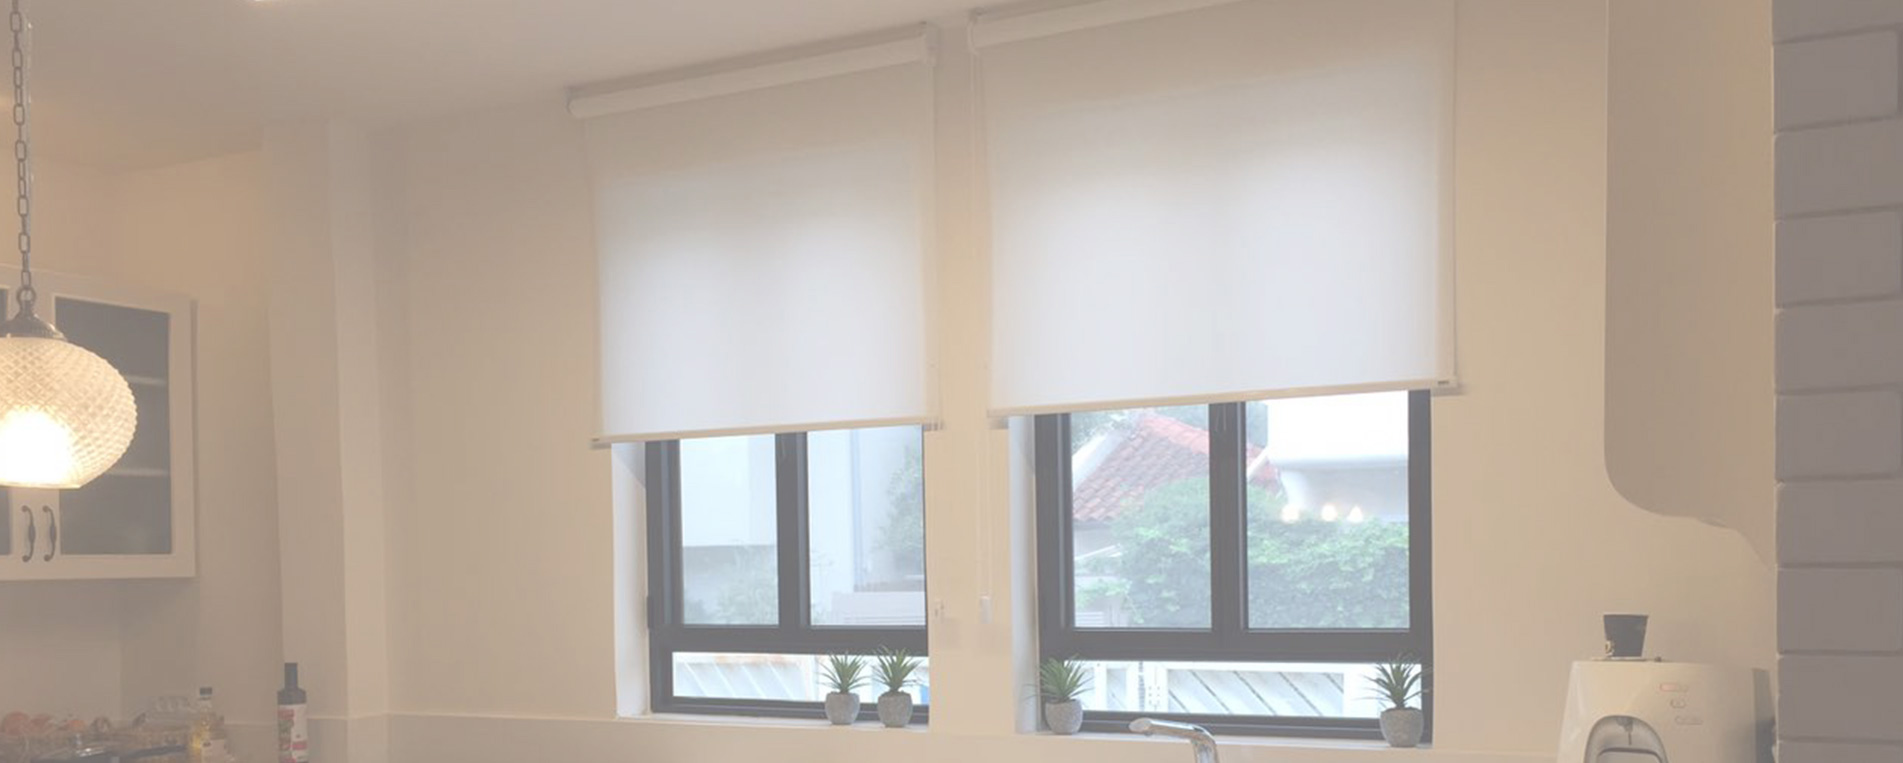 Classic Vertical Blinds Installed In Fremont